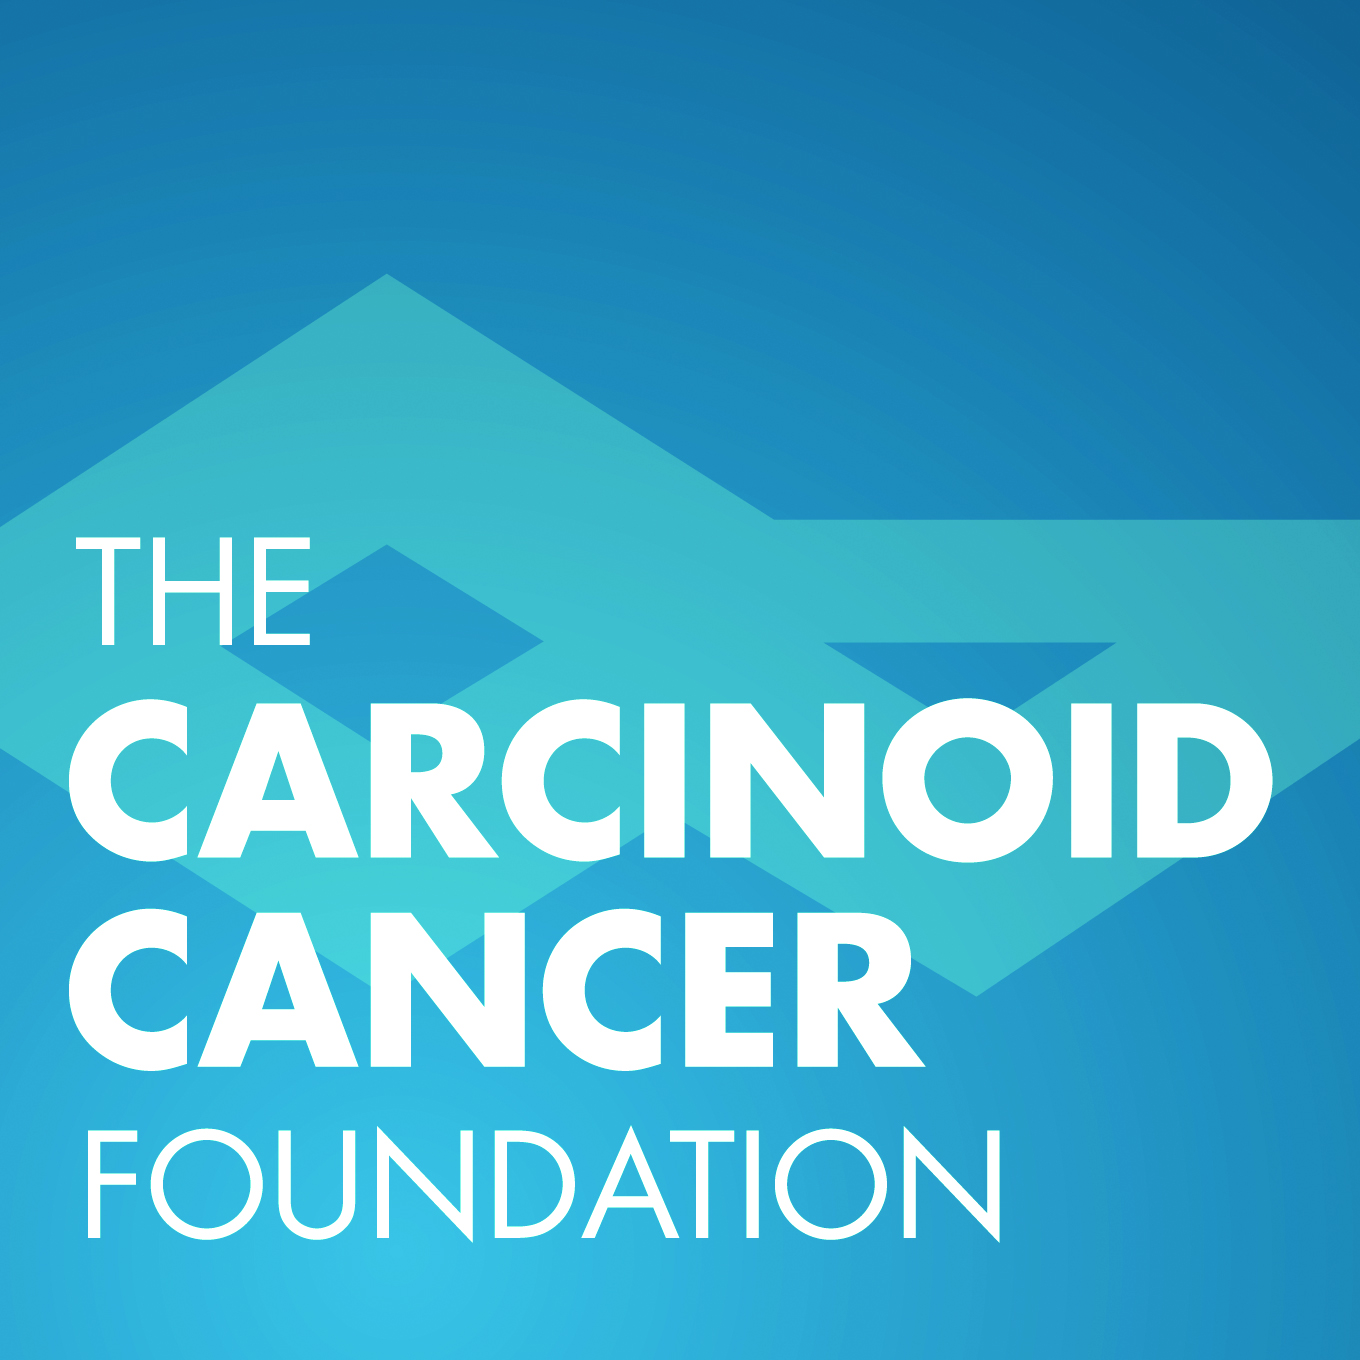 Support the Carcinoid Cancer Foundation on #GivingTuesday